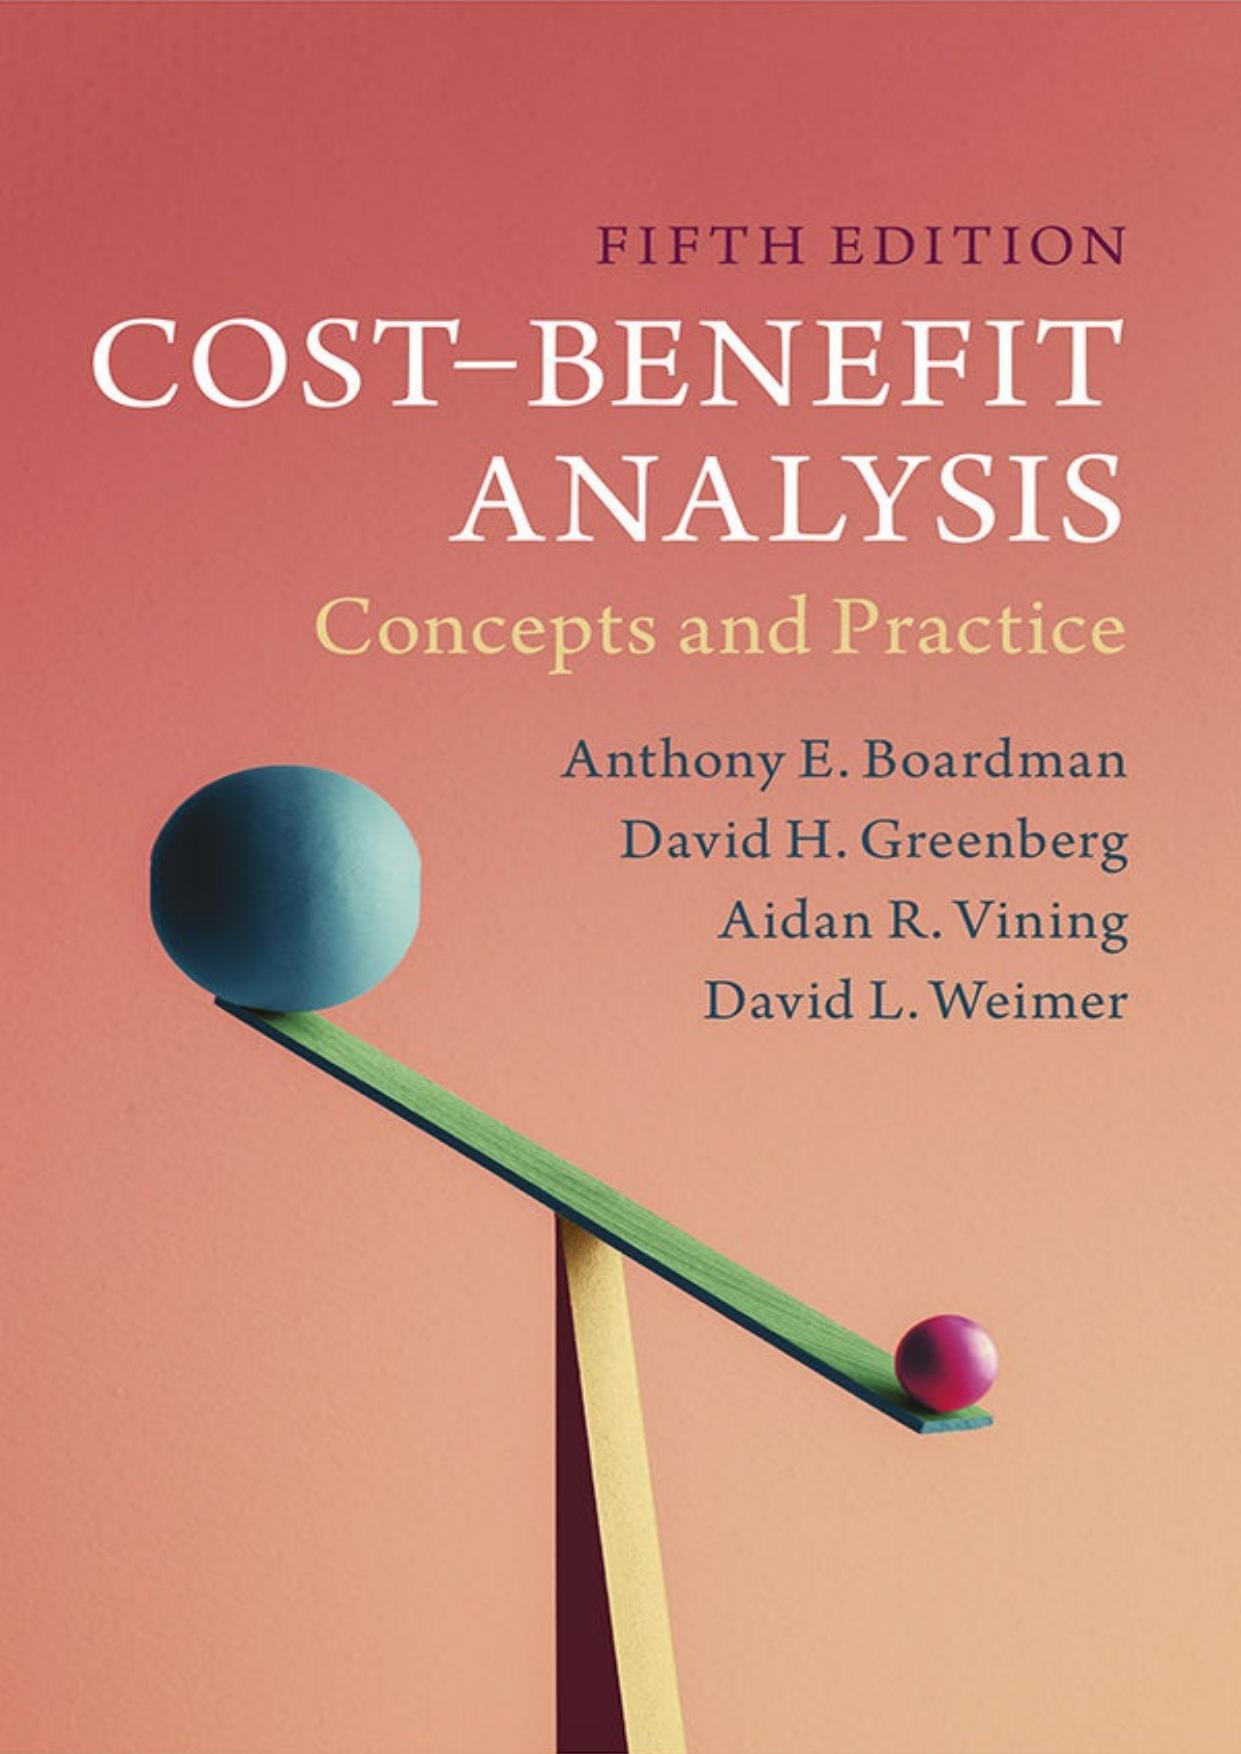 Cost-Benefit Analysis_ Concepts and Practice 5th - Anthony E. rdman & David H. Greenberg & Aidan R. Vining & David L. Weimer.jpg